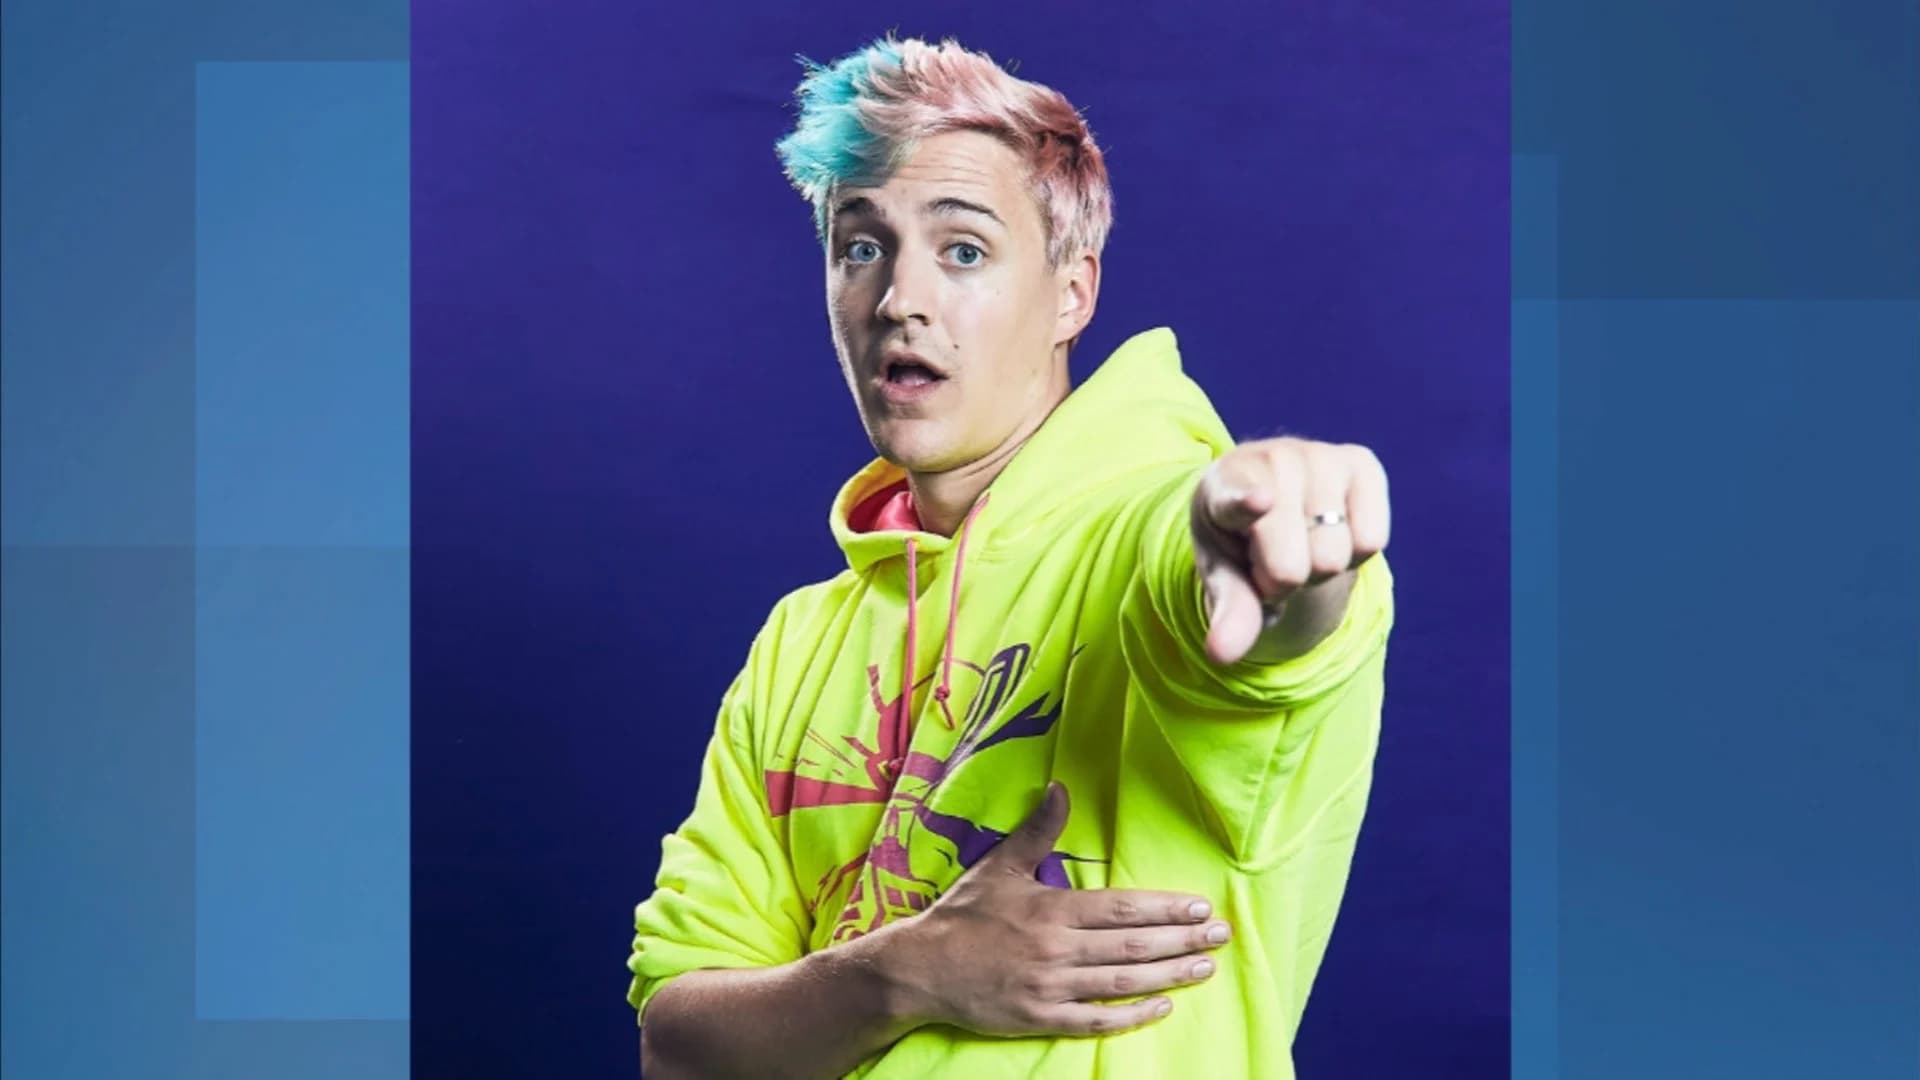 Ninja out: Gaming megastar leaves Twitch for Mixer